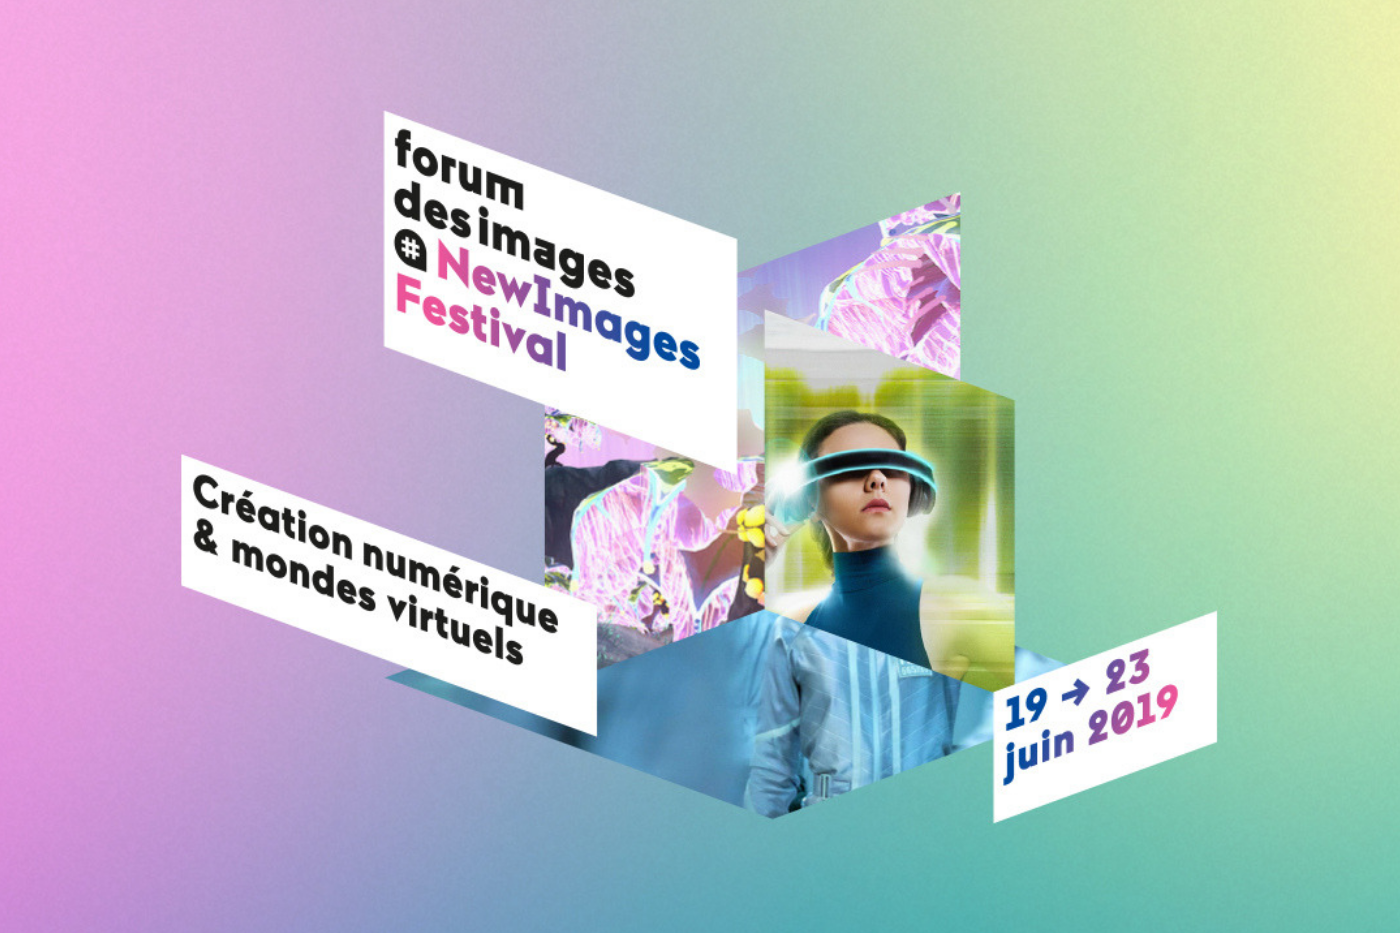 newimages festival focused entirely on immersive technology